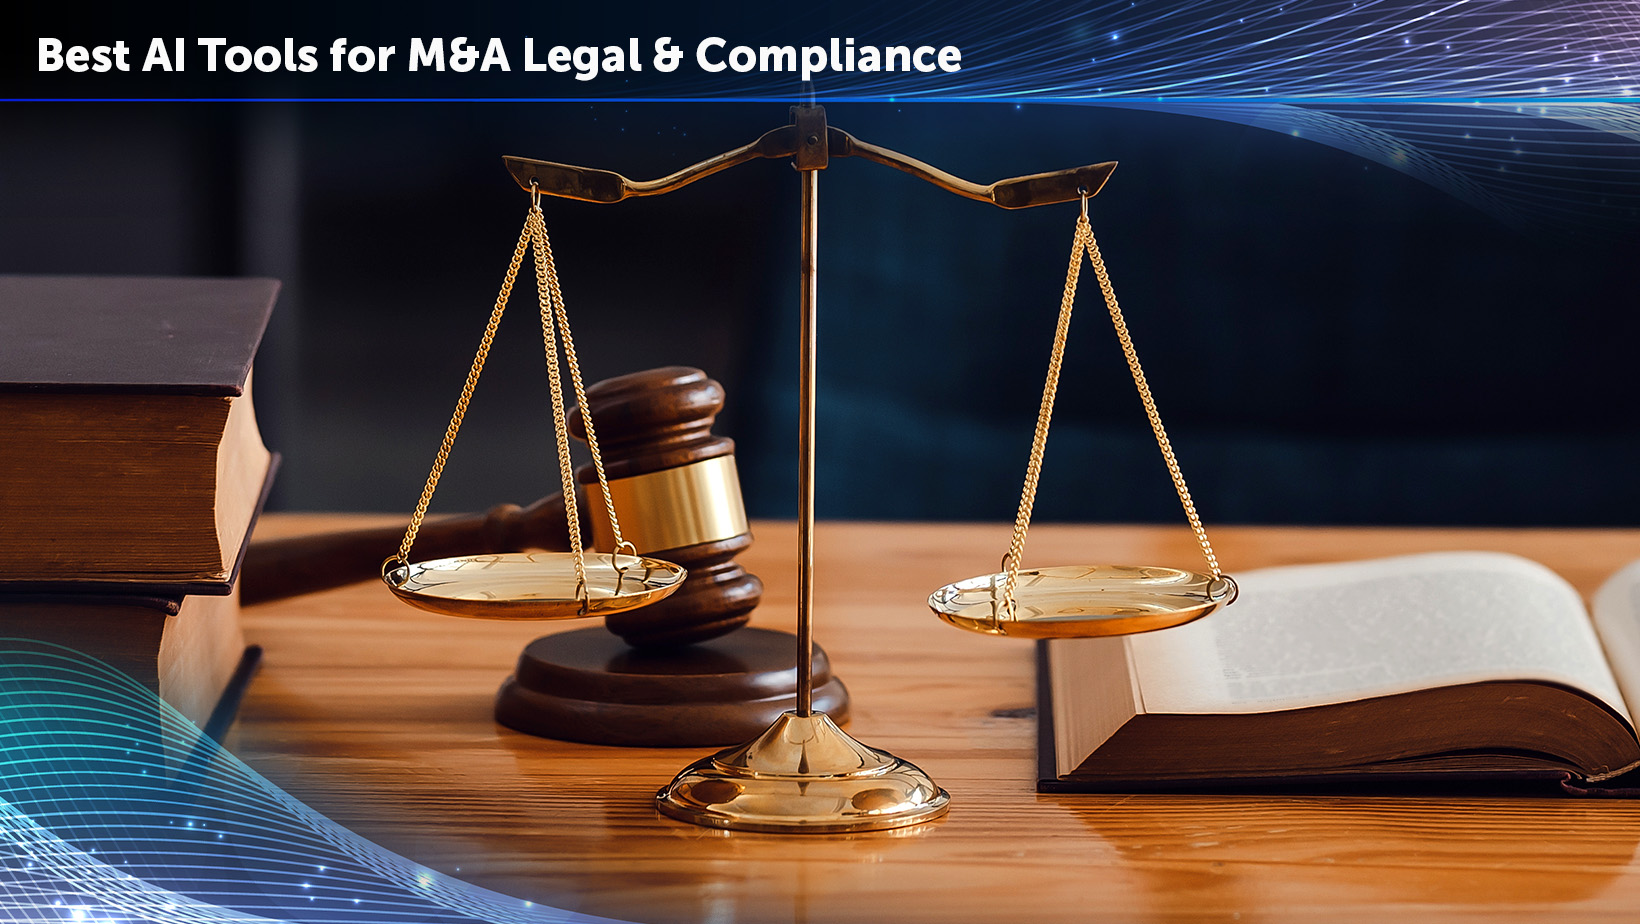 Best AI Tools for M&A Legal & Compliance